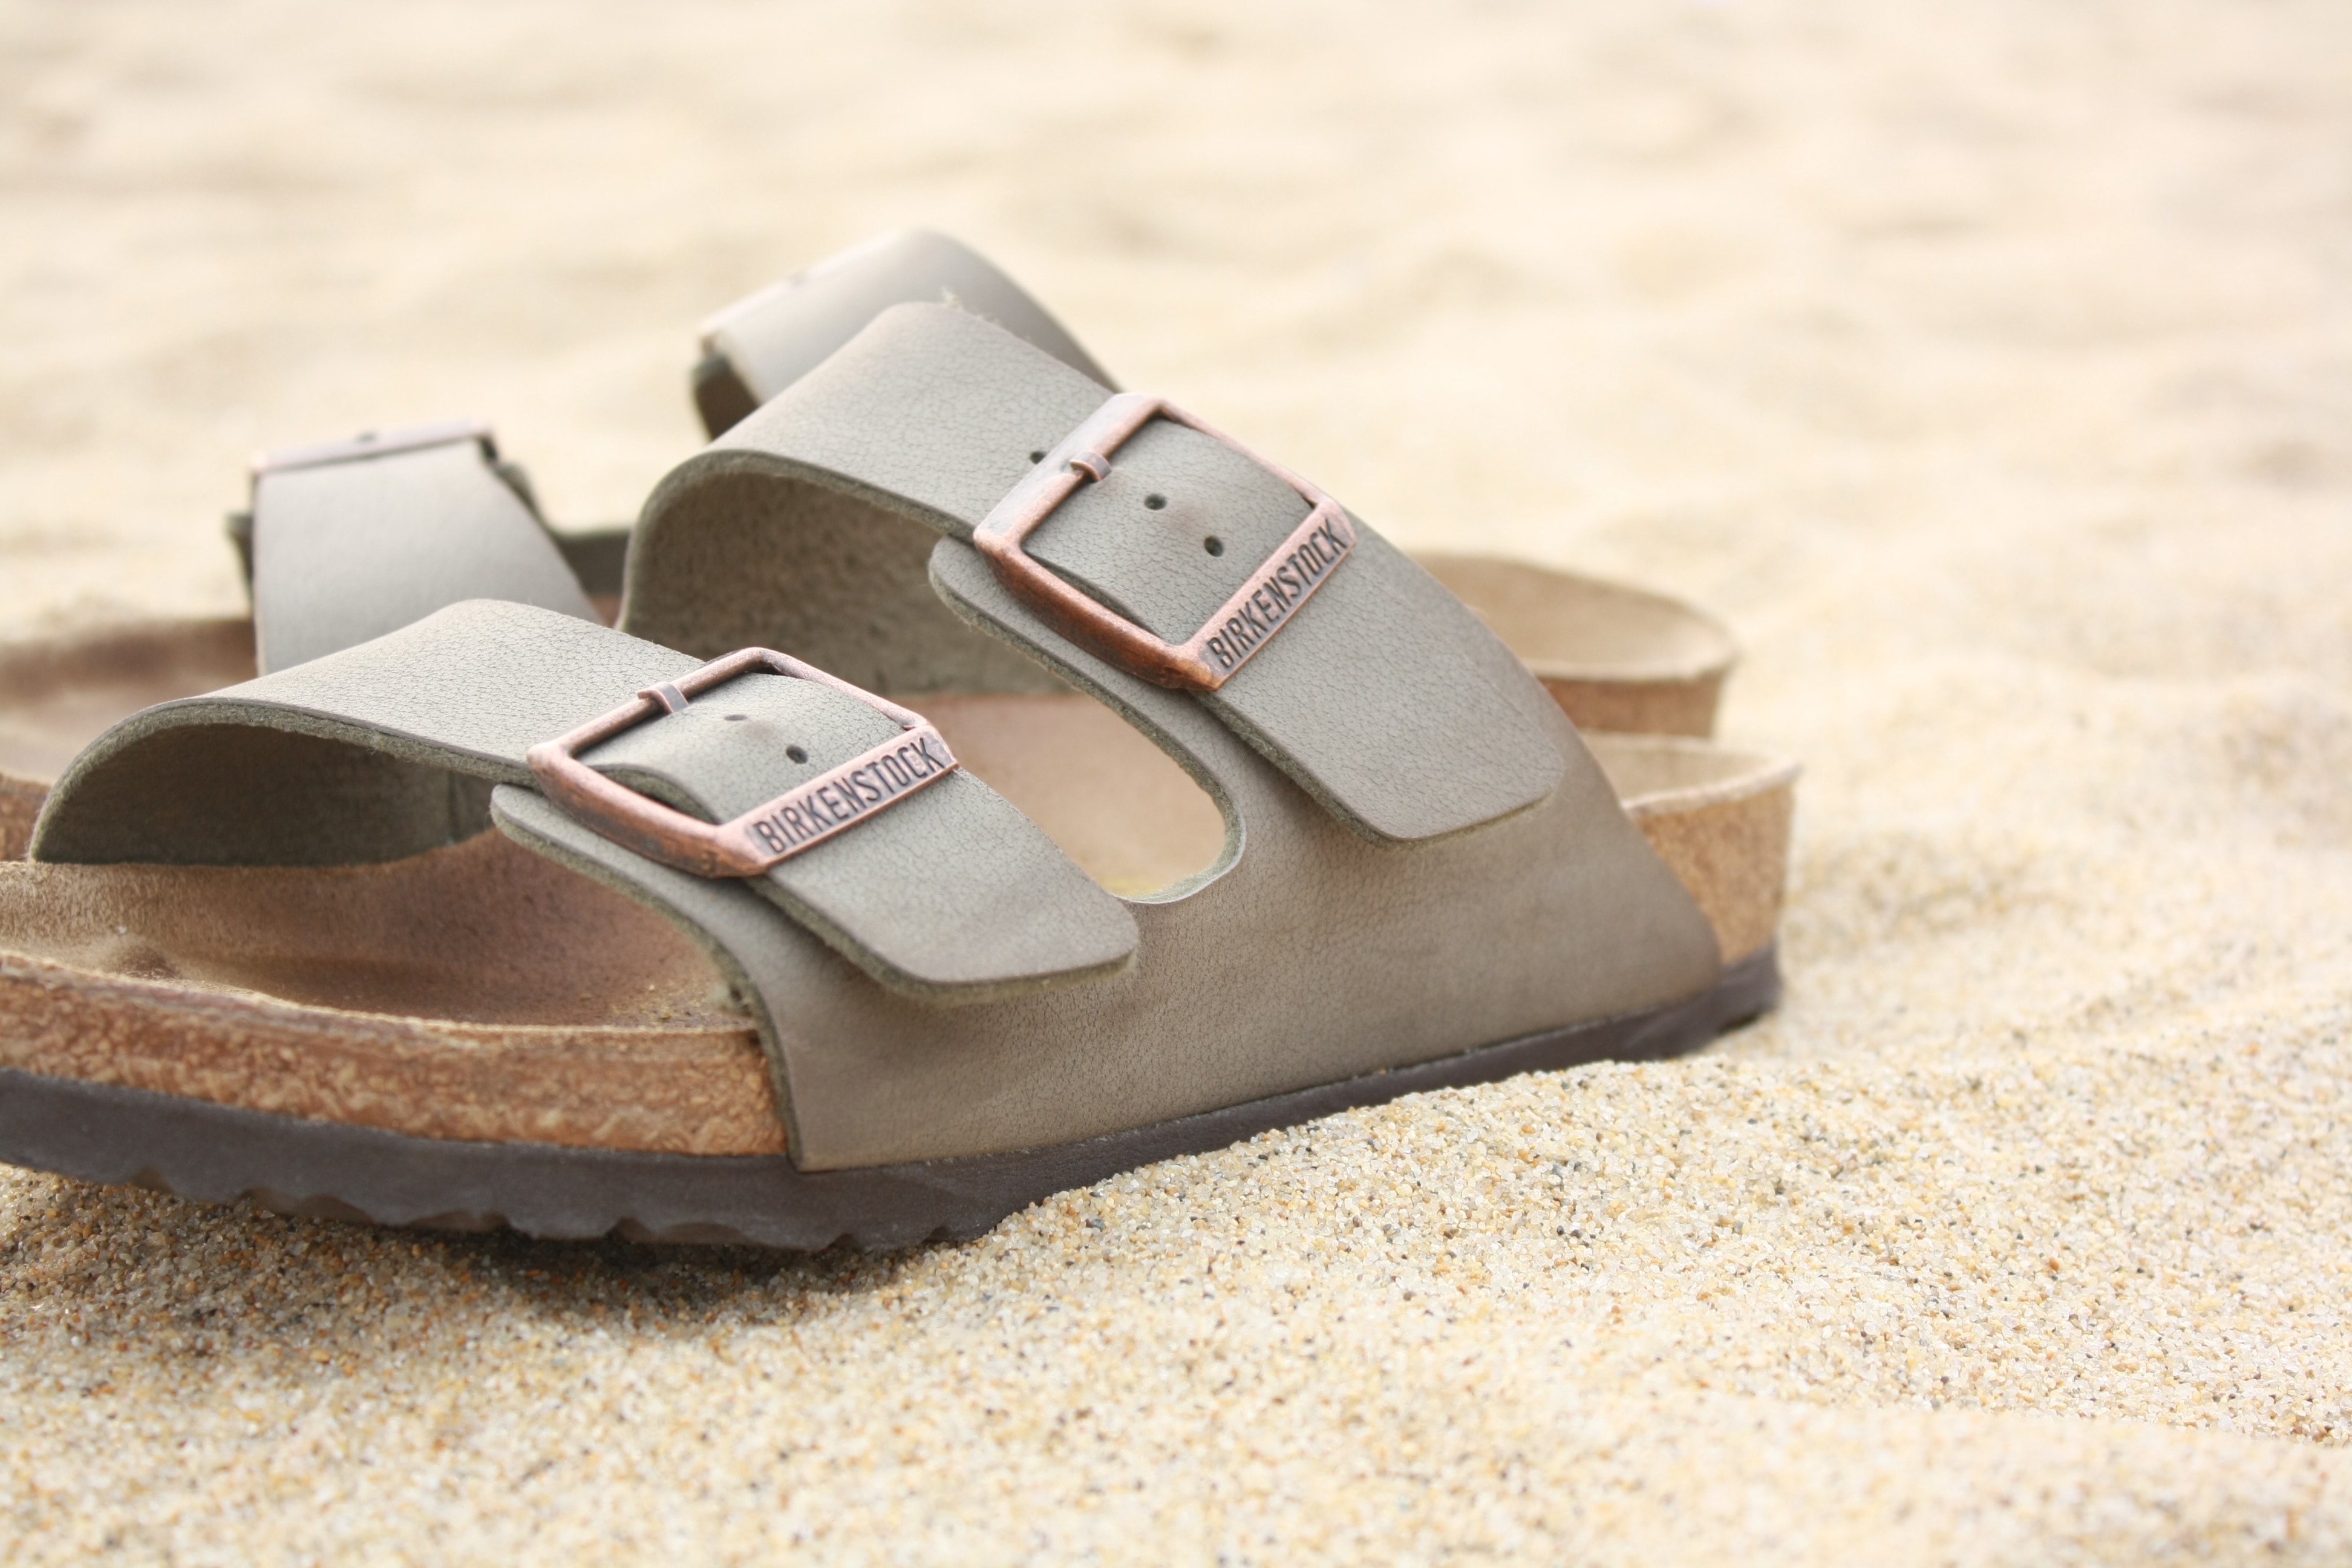 pair of gray and brown slip on sandals